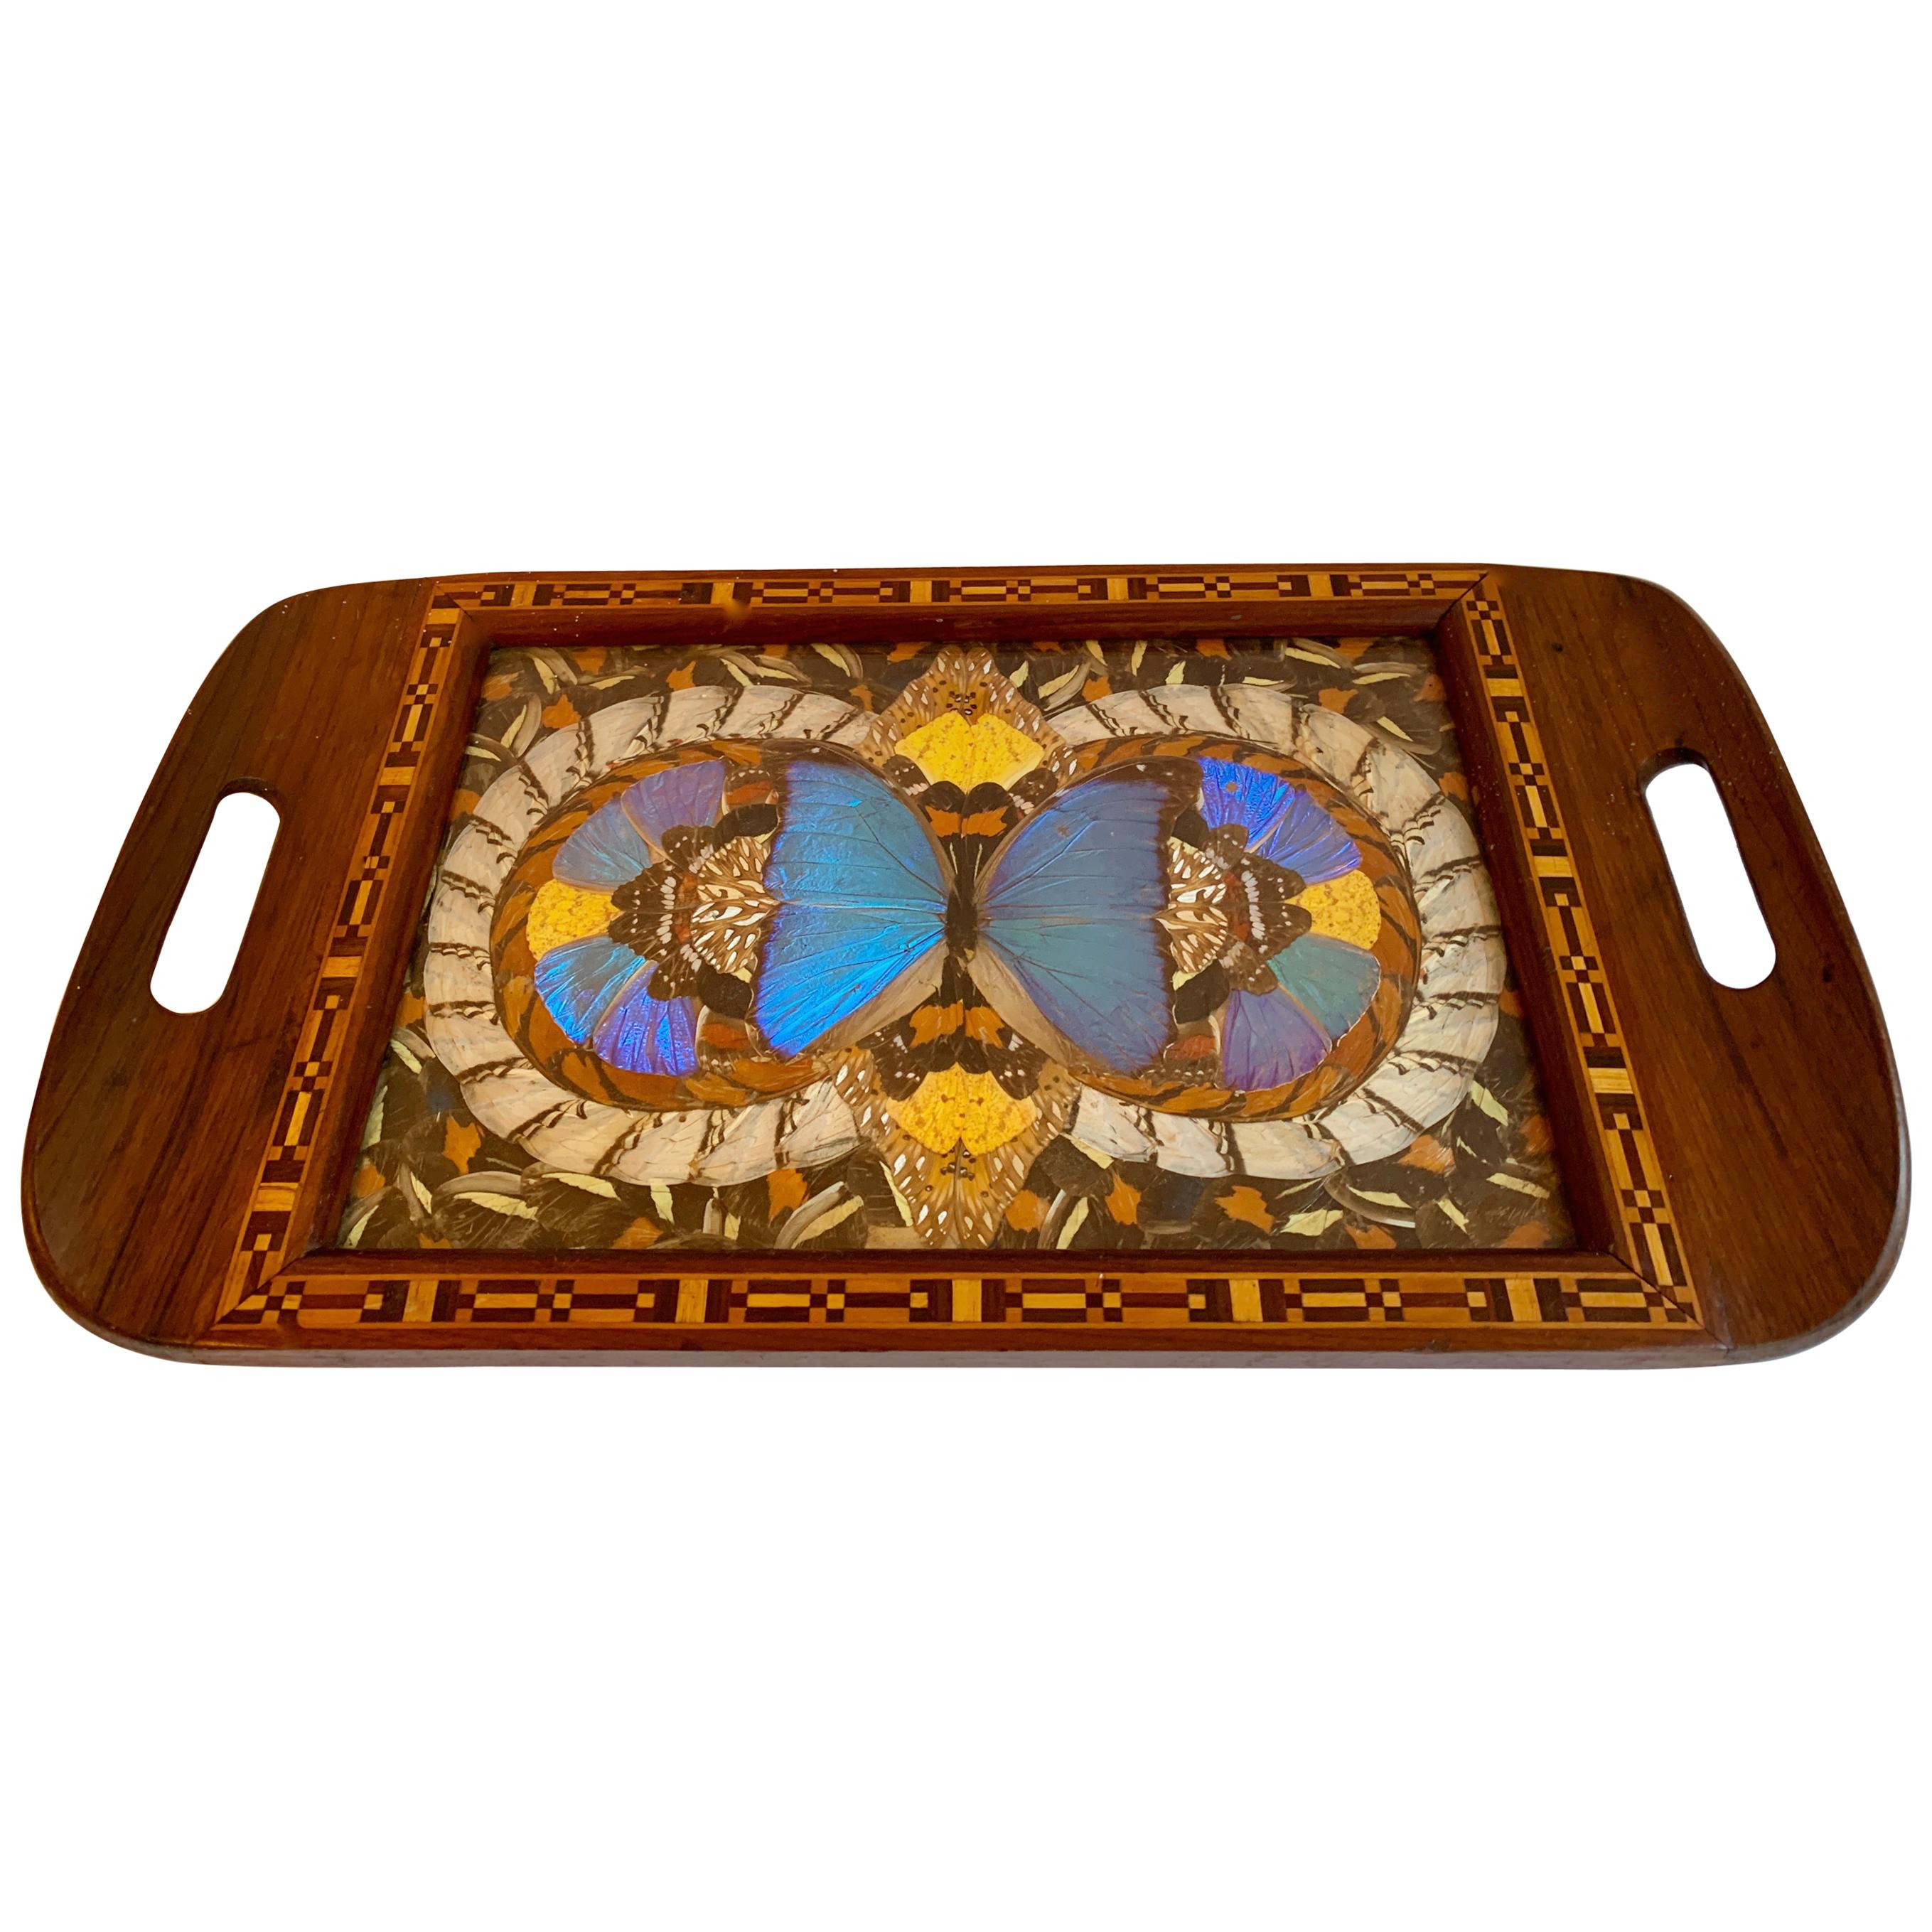 Handmade Folk Art Tray with Butterfly Collage and Inlay Wooden Details